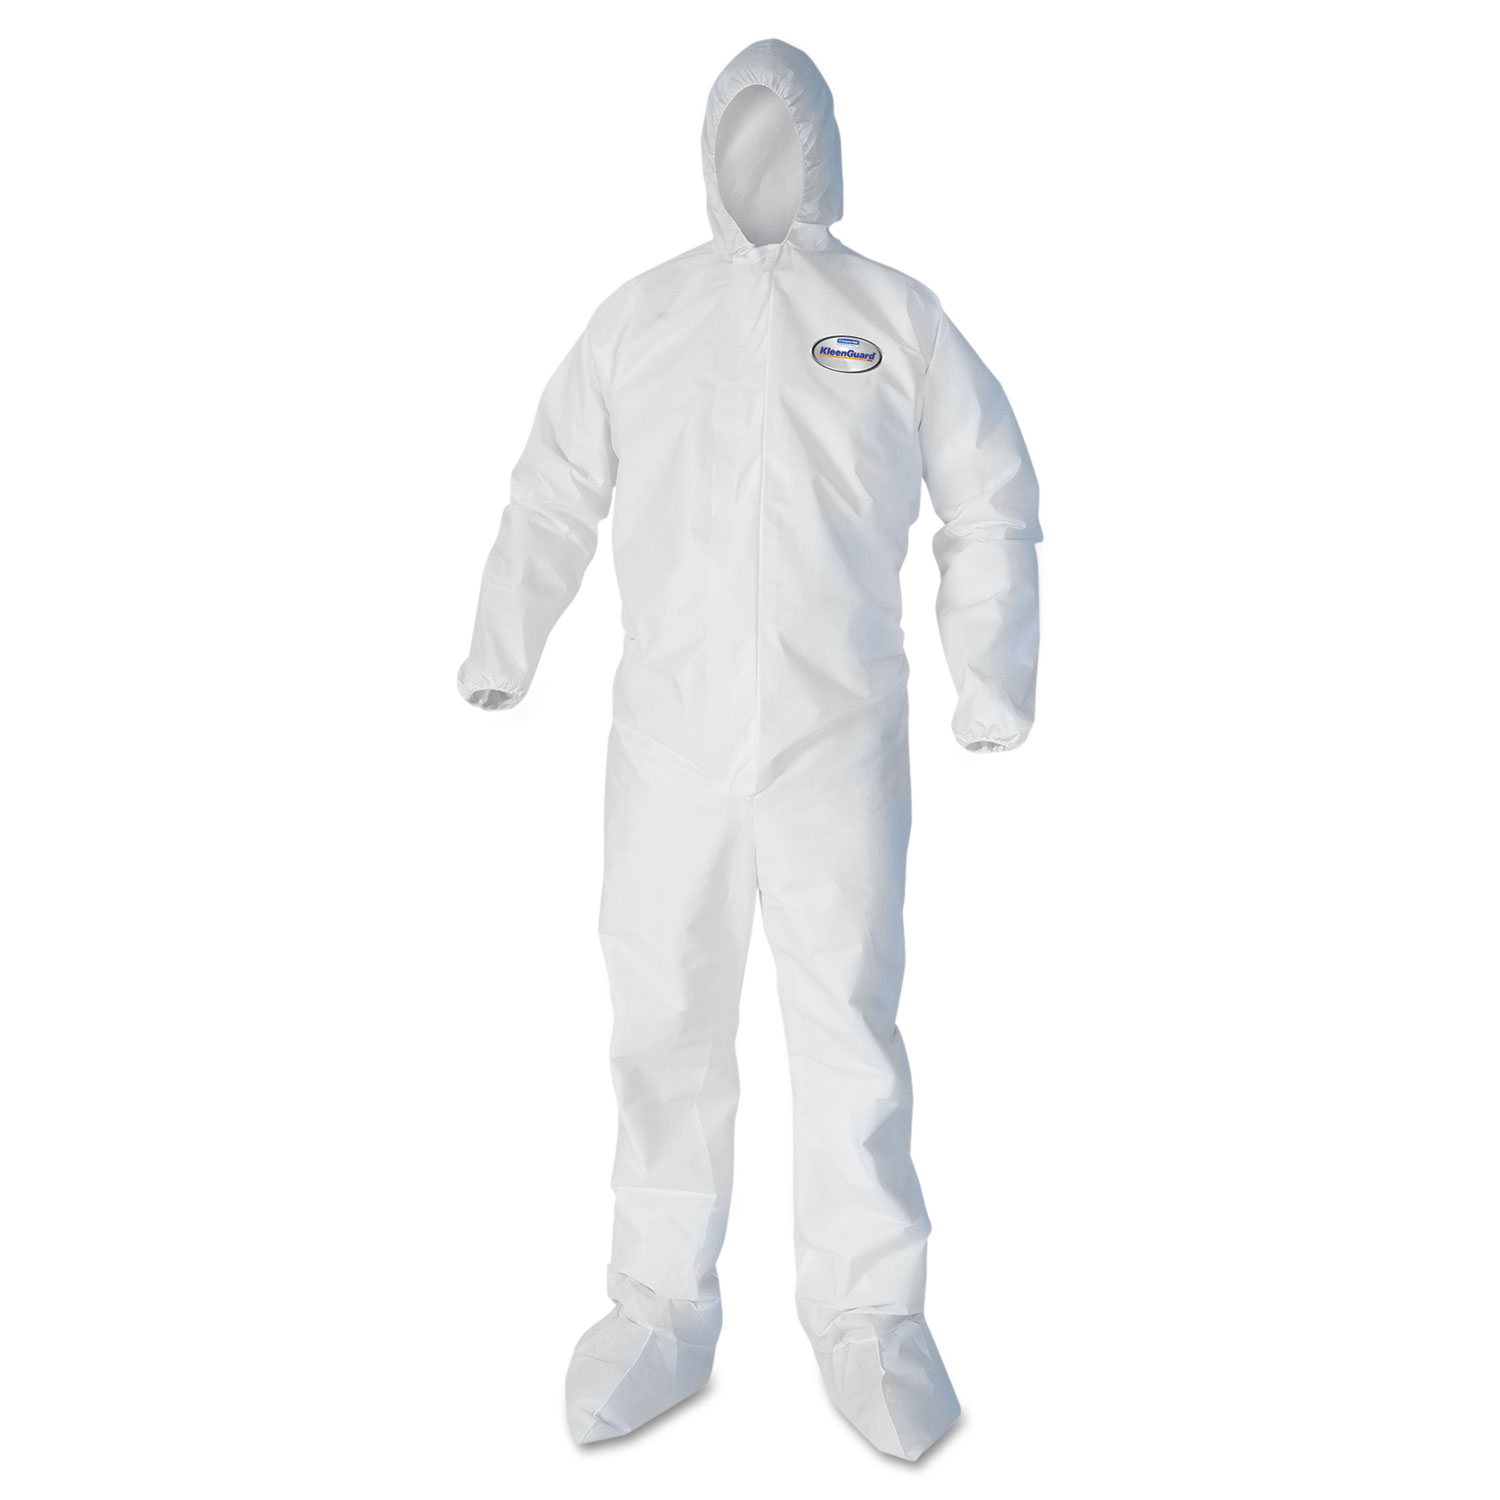 A30 Elastic Back and Cuff Hooded/Boots Coveralls, White, 2XL,25/Ct